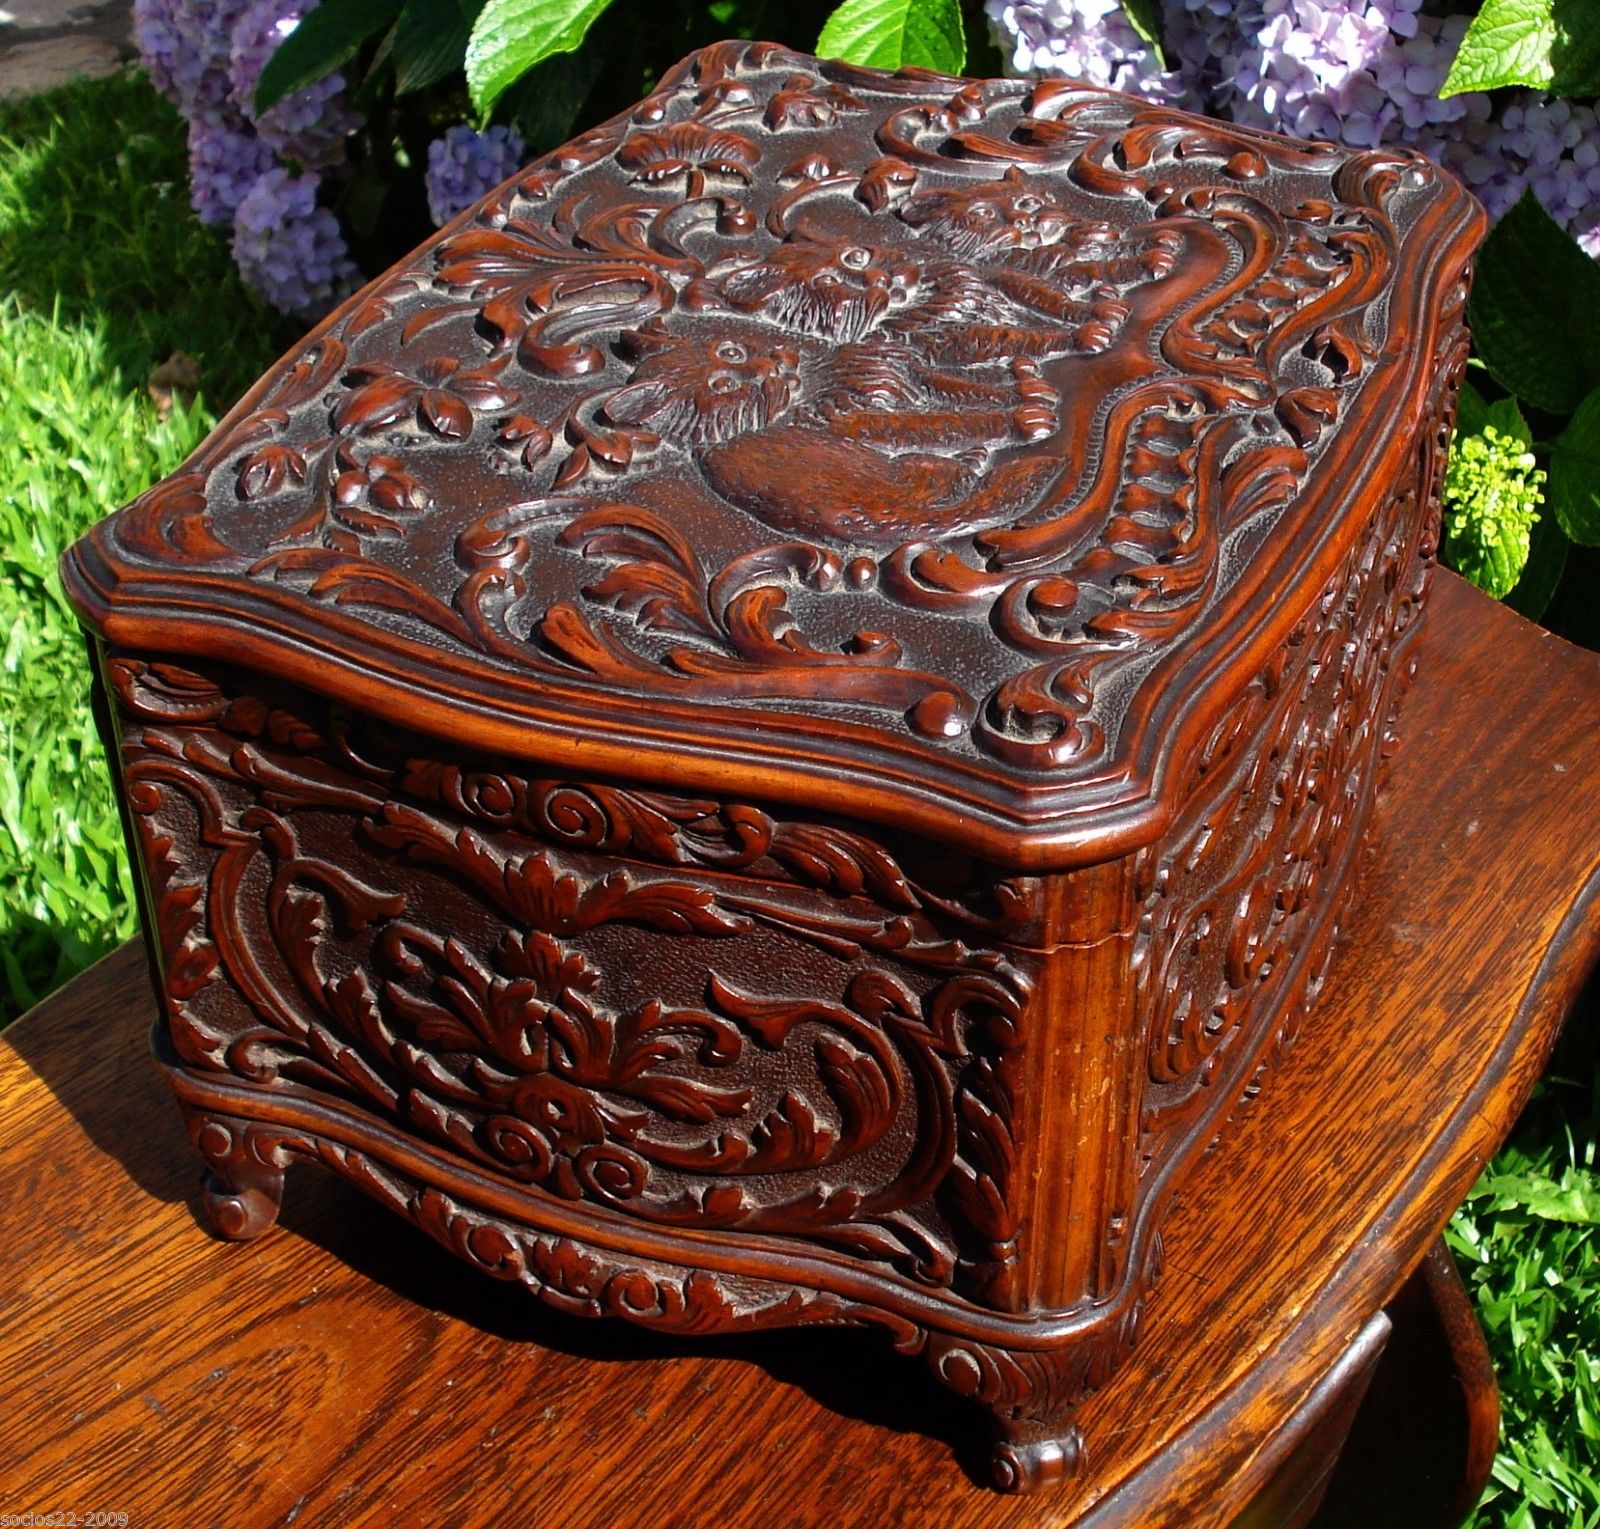 ANTIQUE ORNATE HAND CARVED WOOD JEWELRY BOX WITH CATS